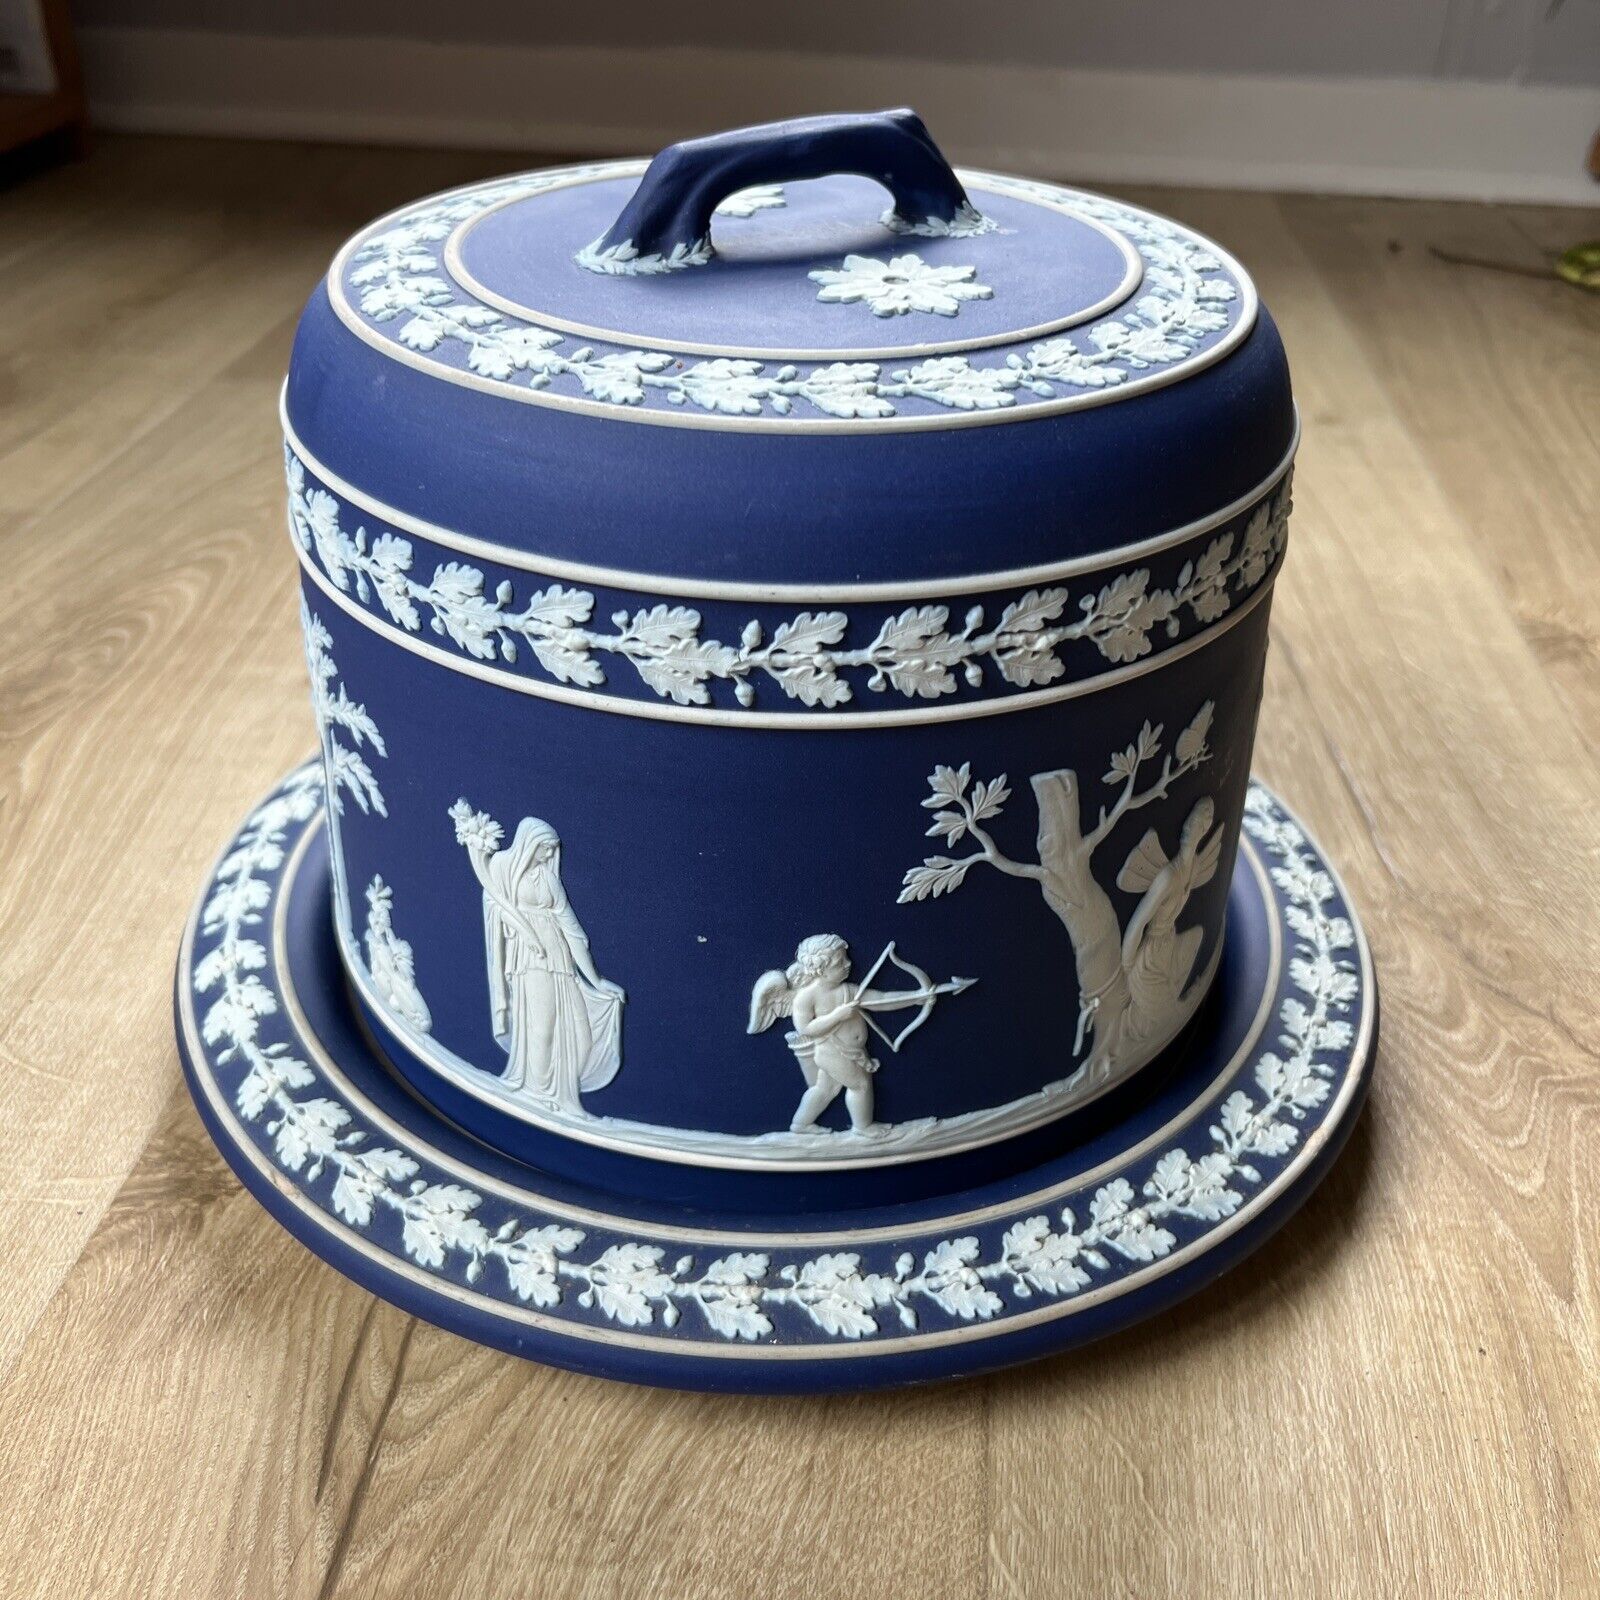 1891 ~ WEDGWOOD DARK BLUE CHEESE DOME WITH BASE PLATE - 7\